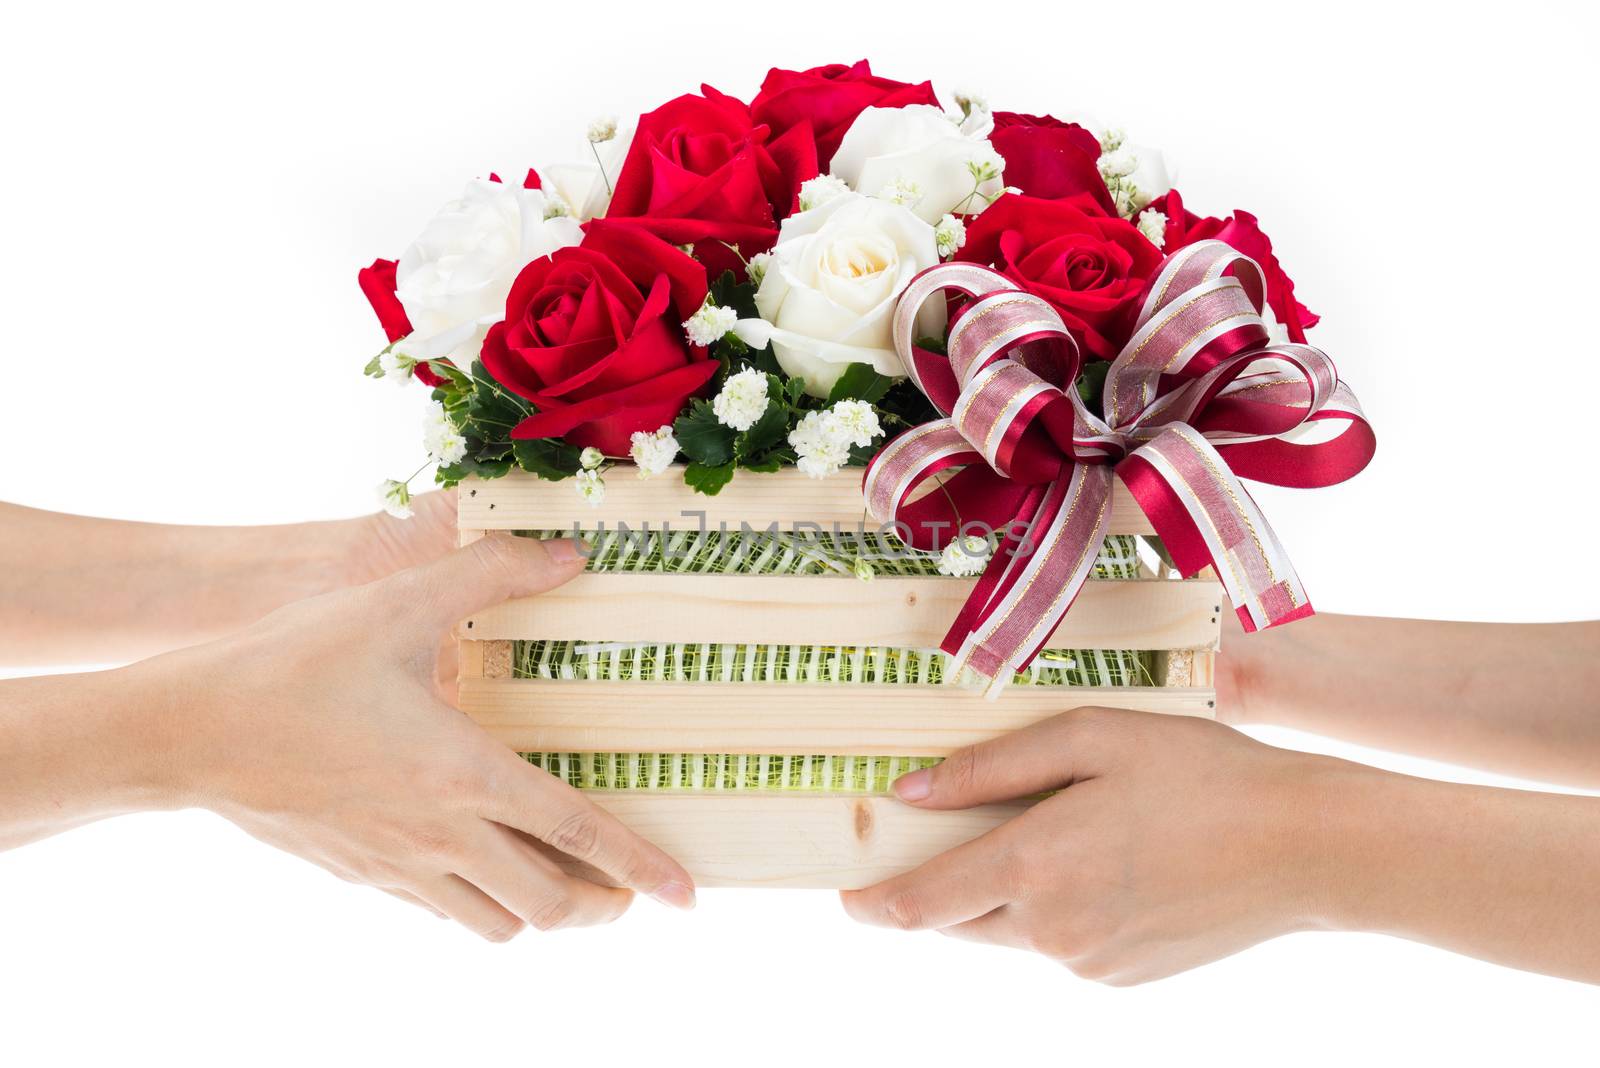 Hand delivers baskets of red and white rose flowers as a gift isolated on white background